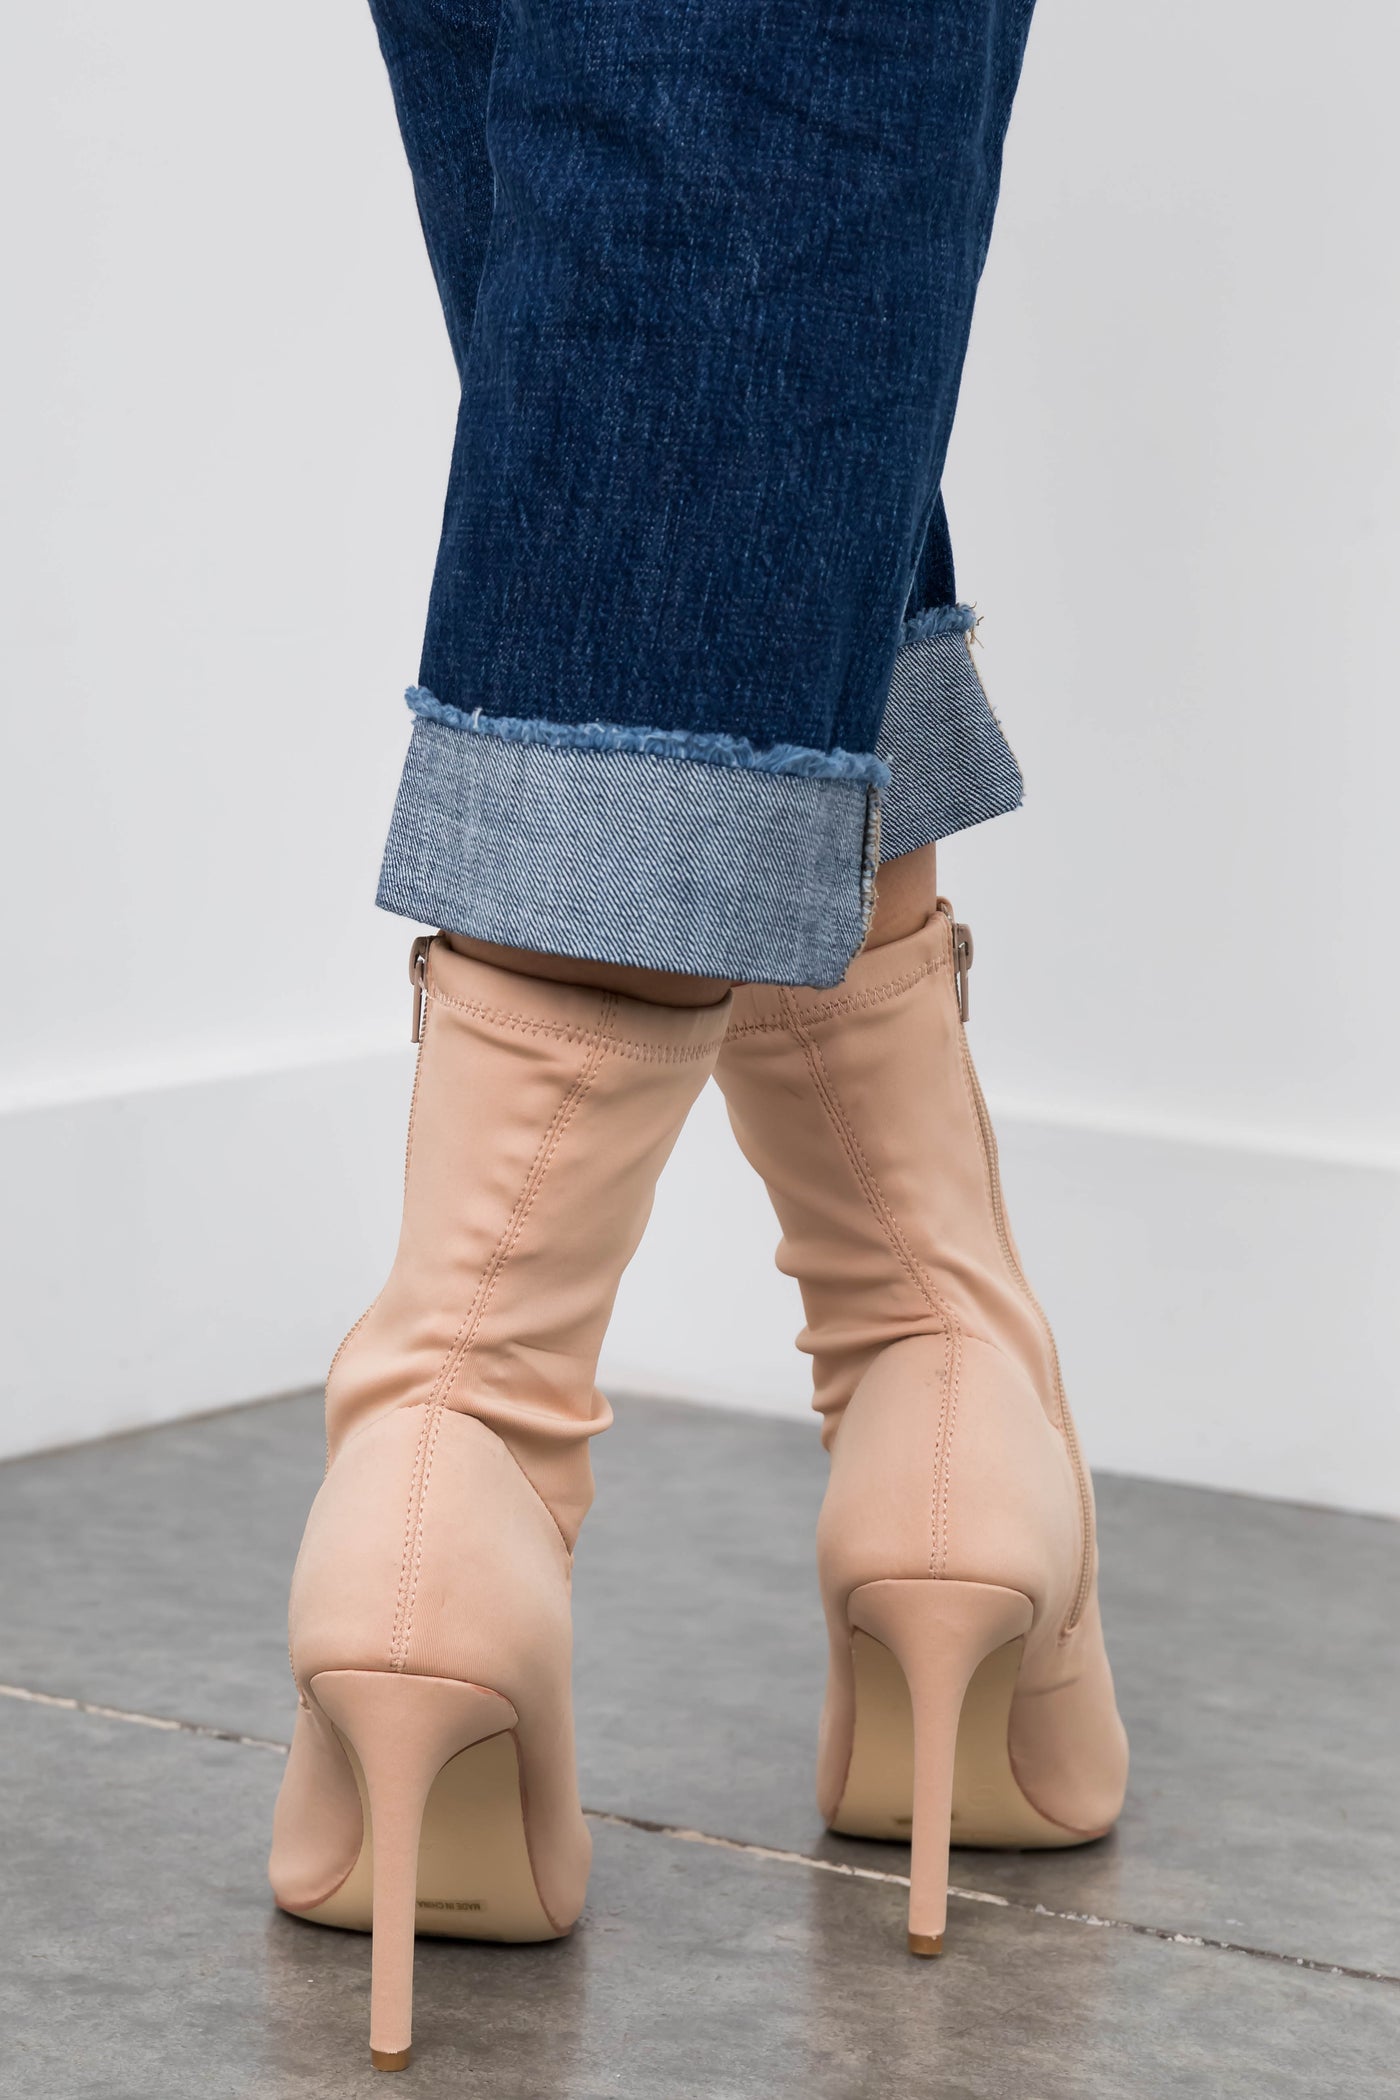 Nude Open Toe Stretchy Knit Stiletto Booties